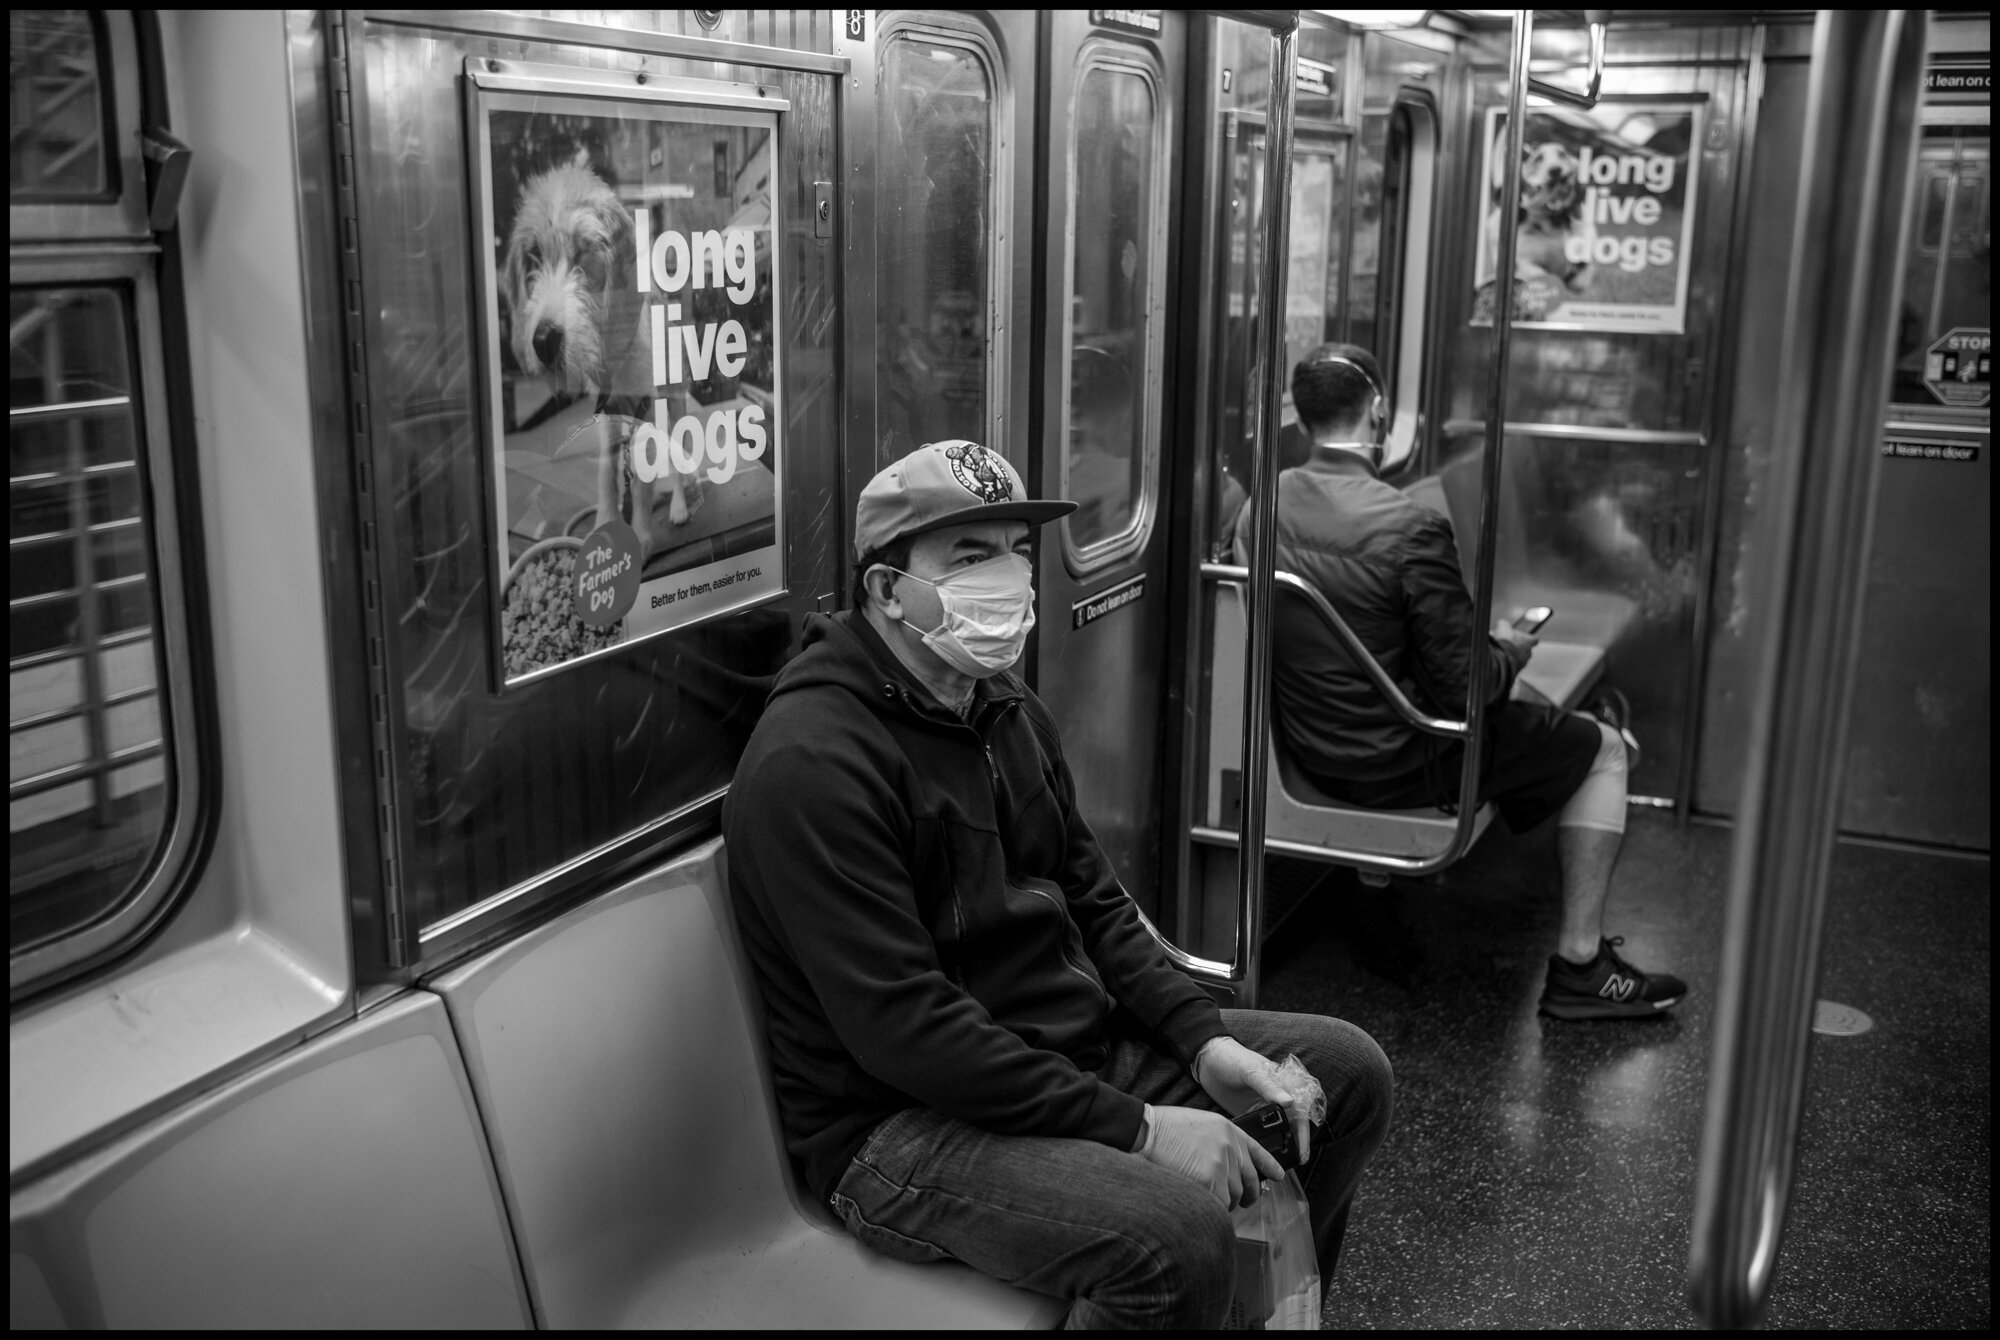  A masked man rides north on the #1 train.  March 21, 2020. © Peter Turnley.  ID# 01-017 